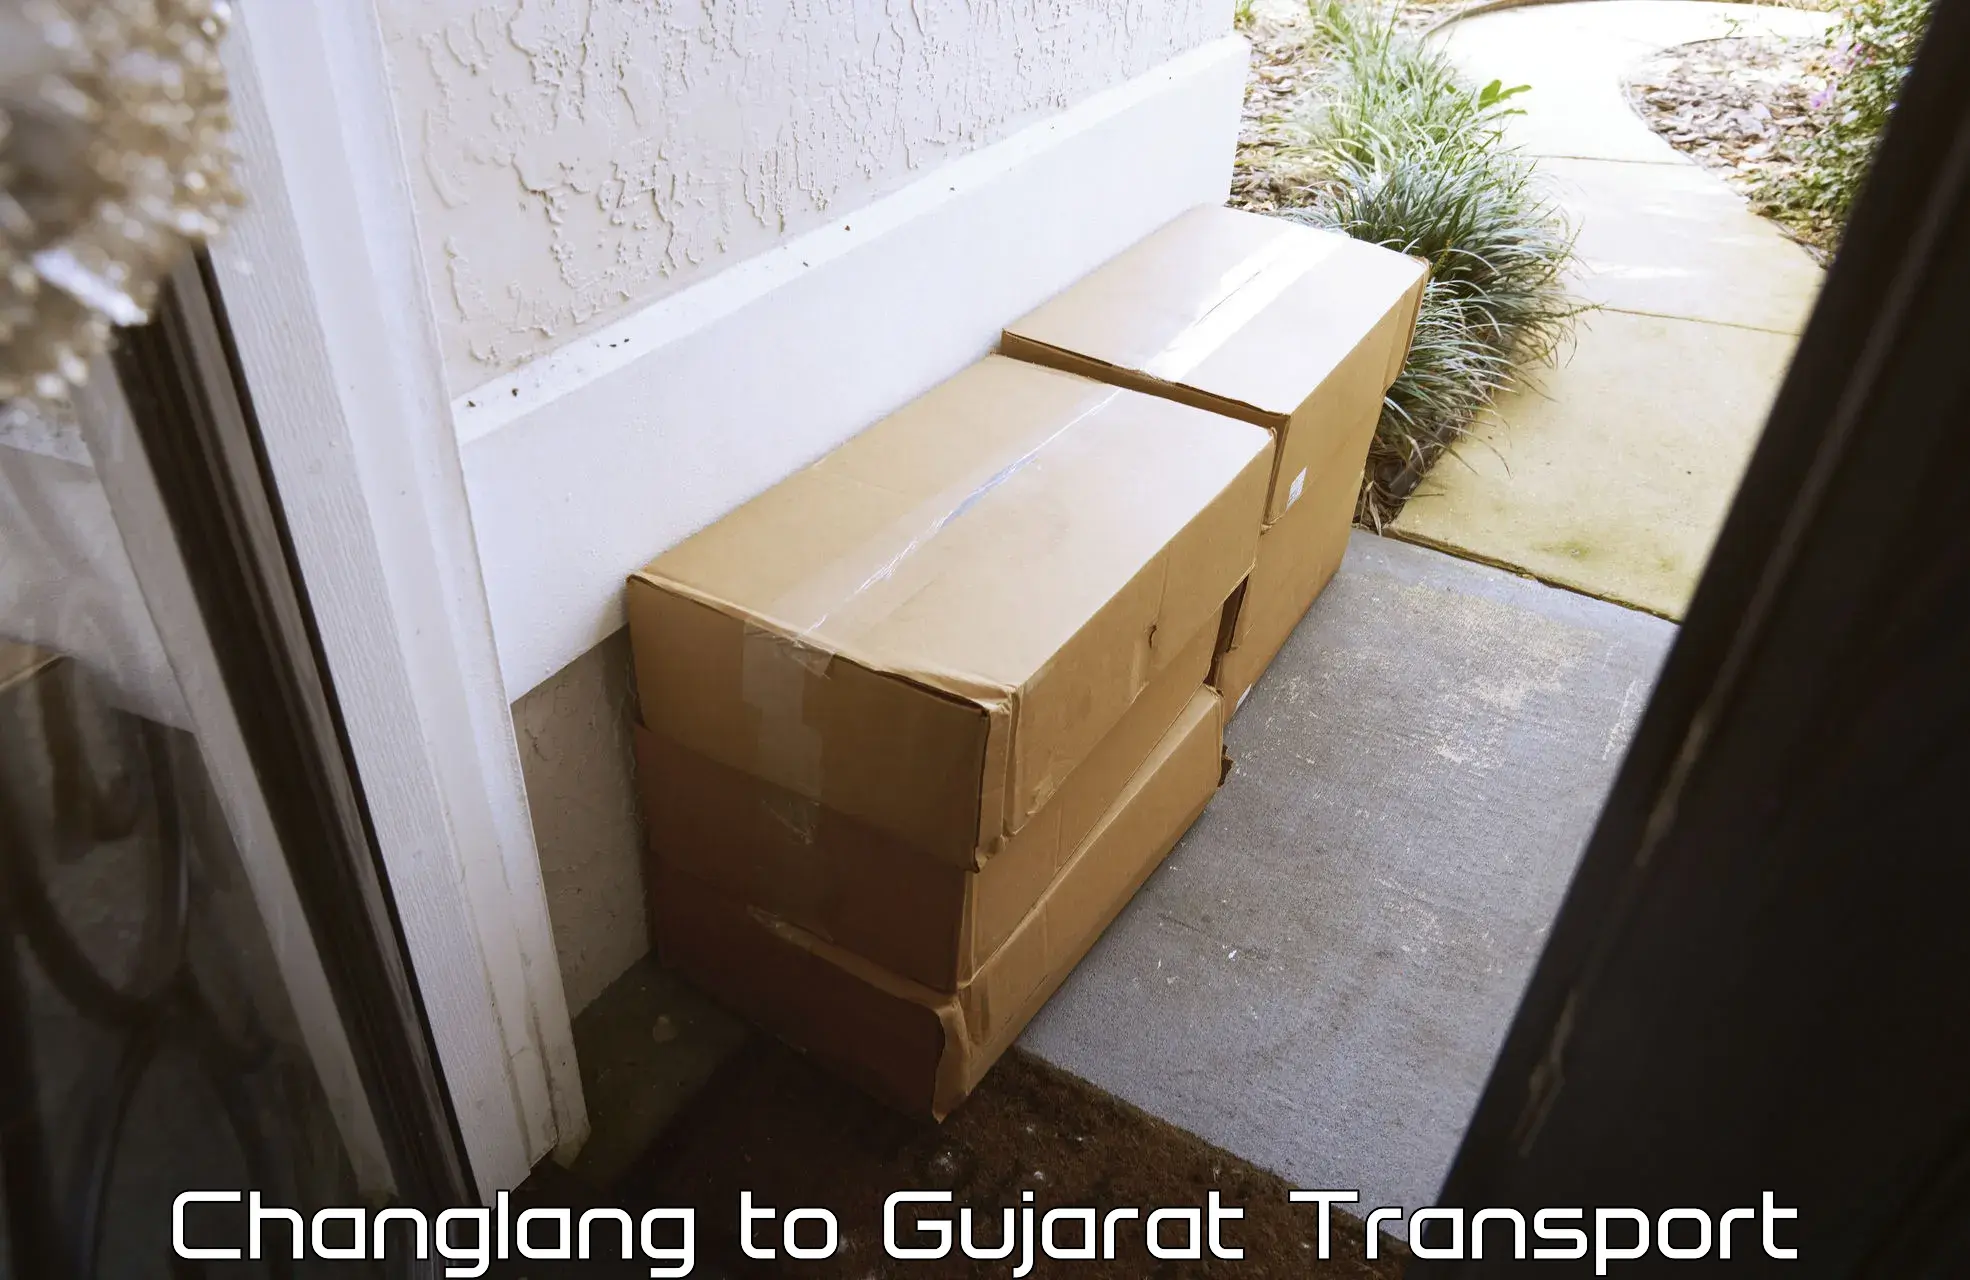 Interstate transport services Changlang to Gujarat